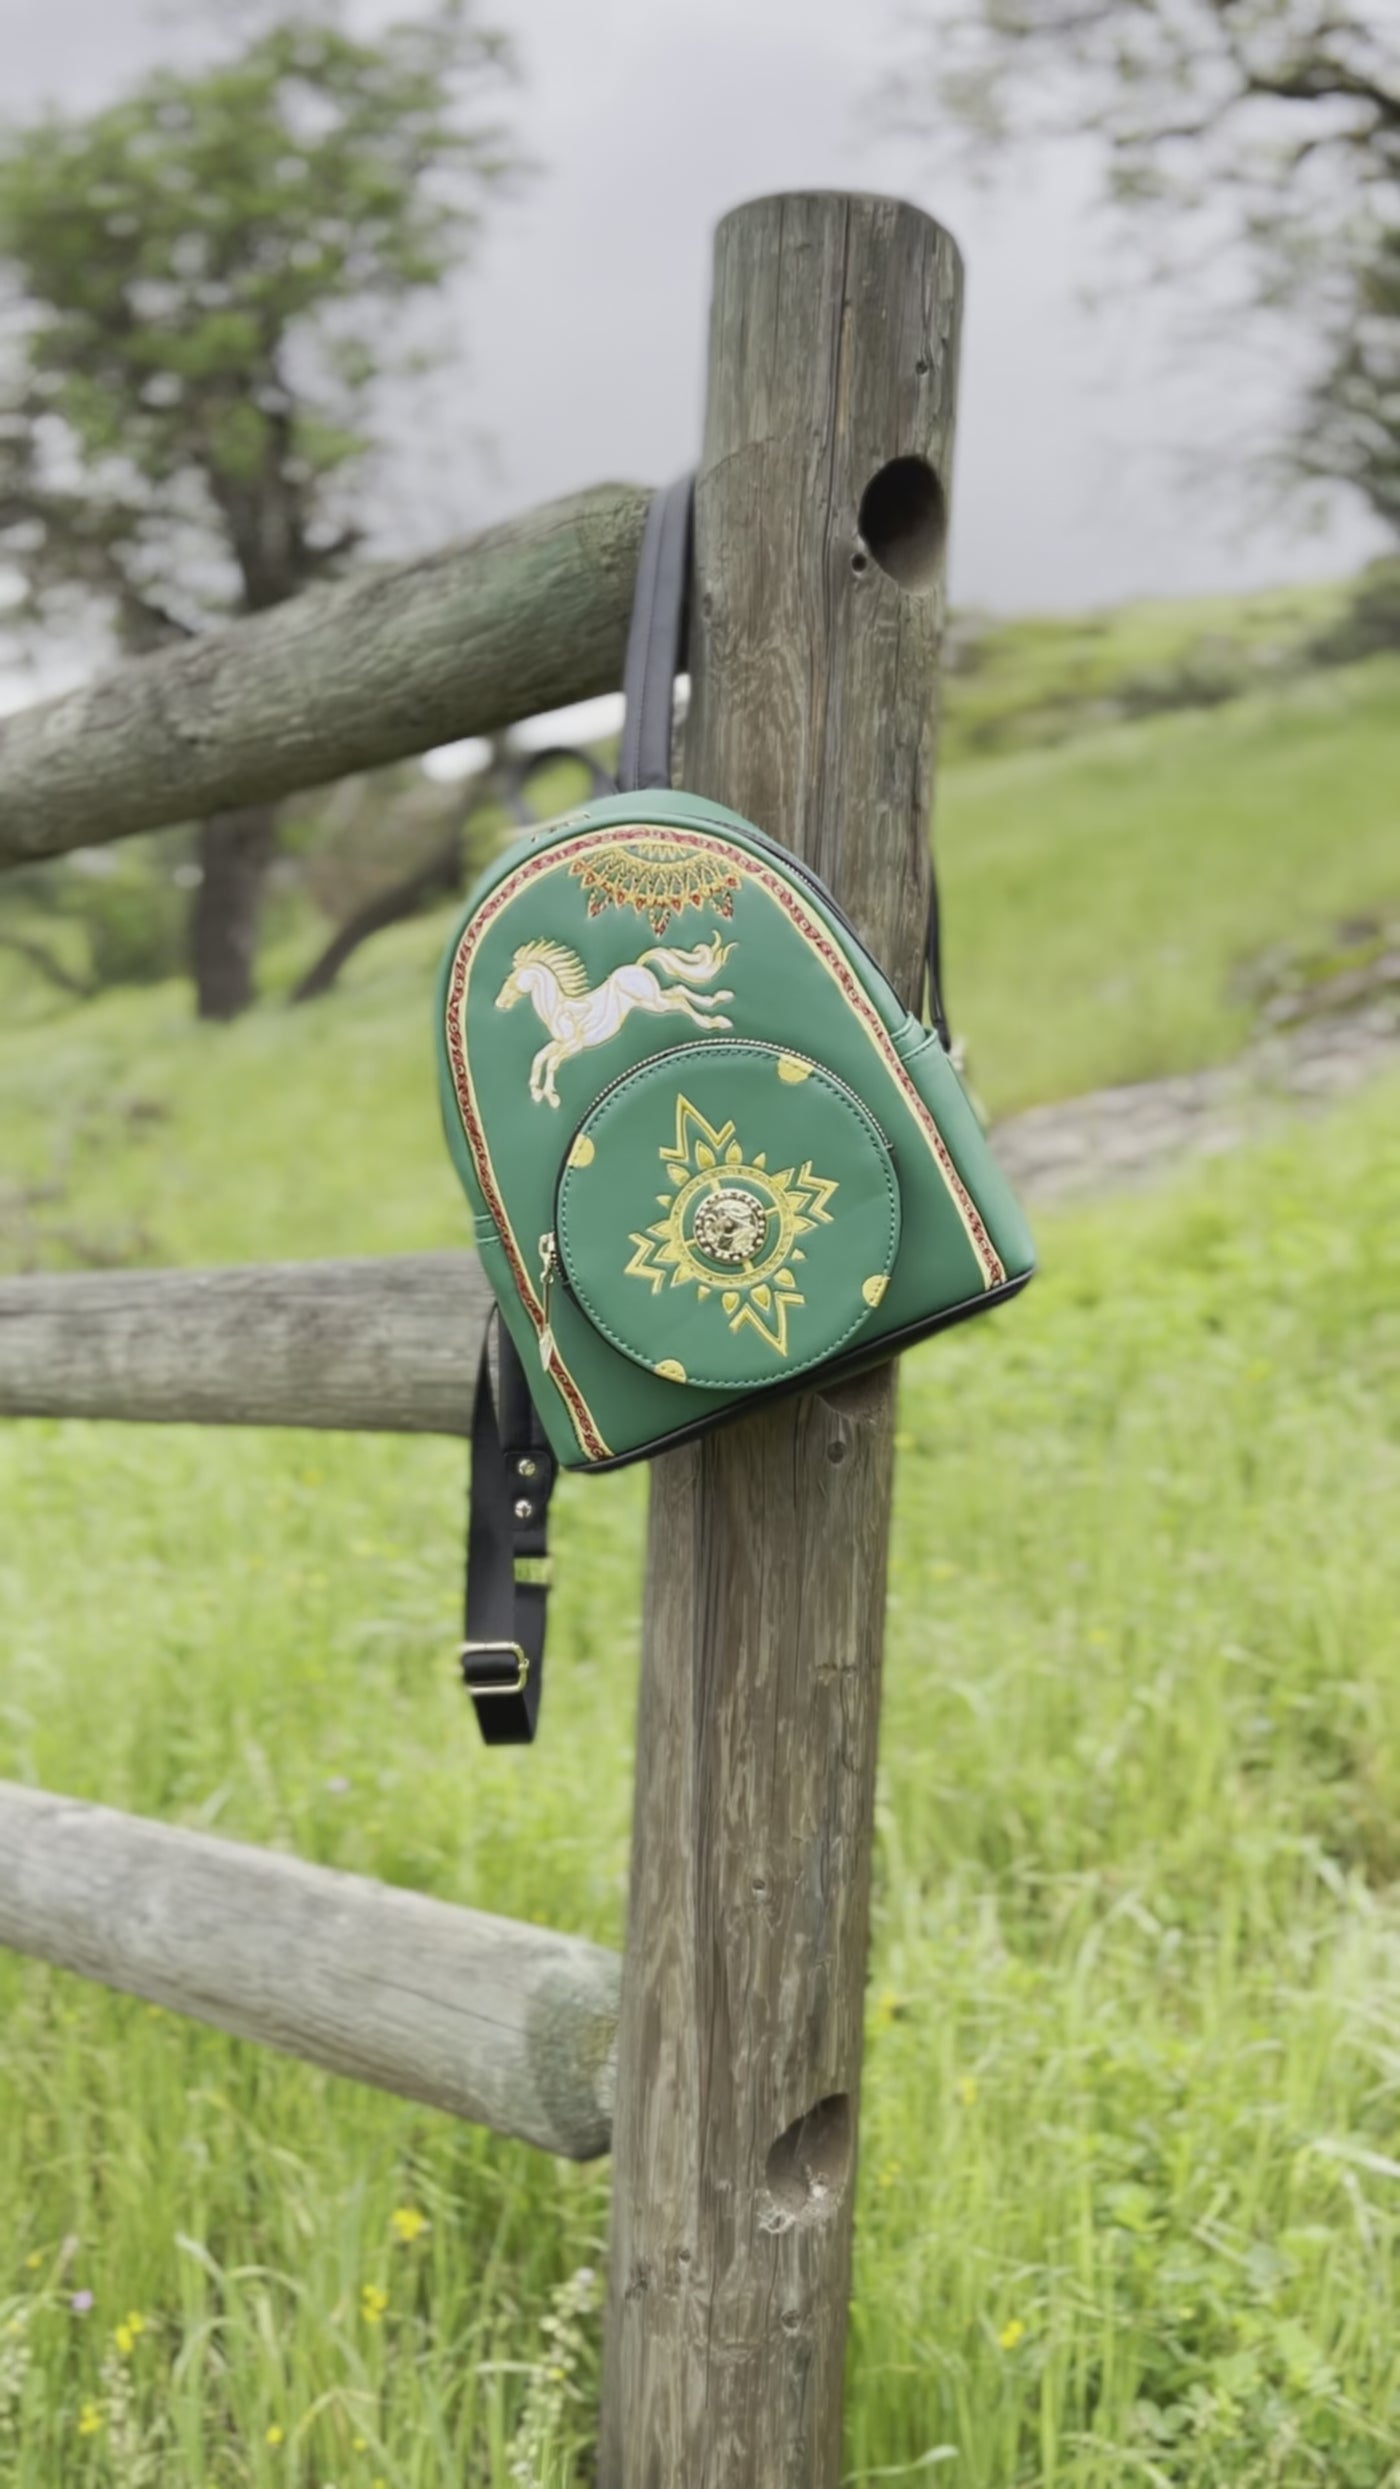 Grotto Treasures Exclusive - The Lord of the Rings Rohan Mini Backpack